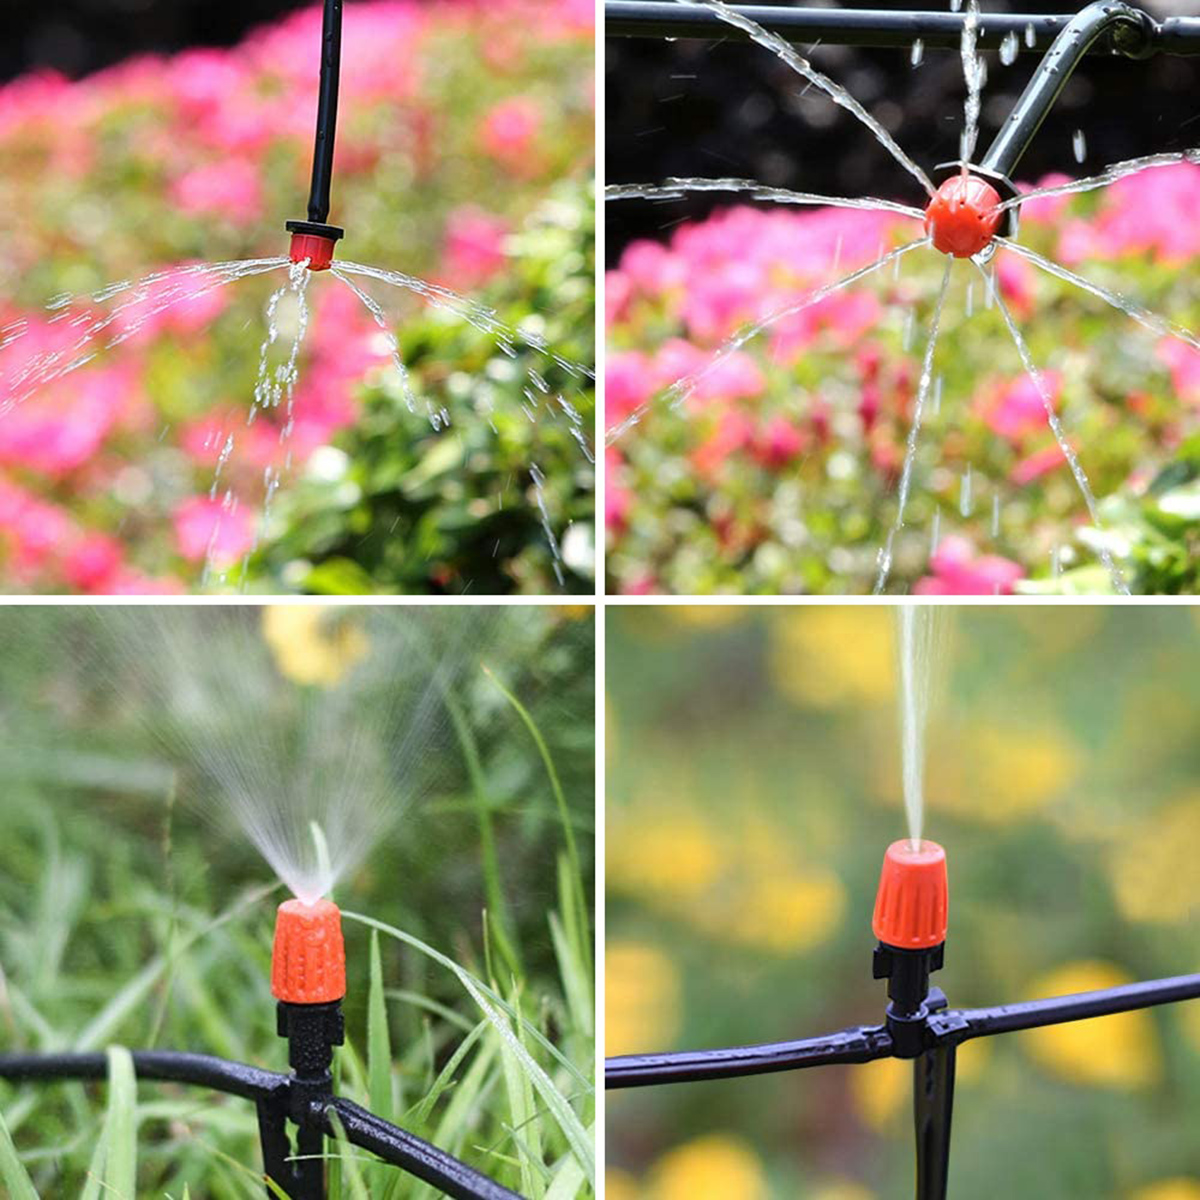 15M-Micro-Drip-Irrigation-Kit-Drip-UV-resistant-Automatic-Irrigation-System-for-Greenhouse-Garden-Pa-1884007-3